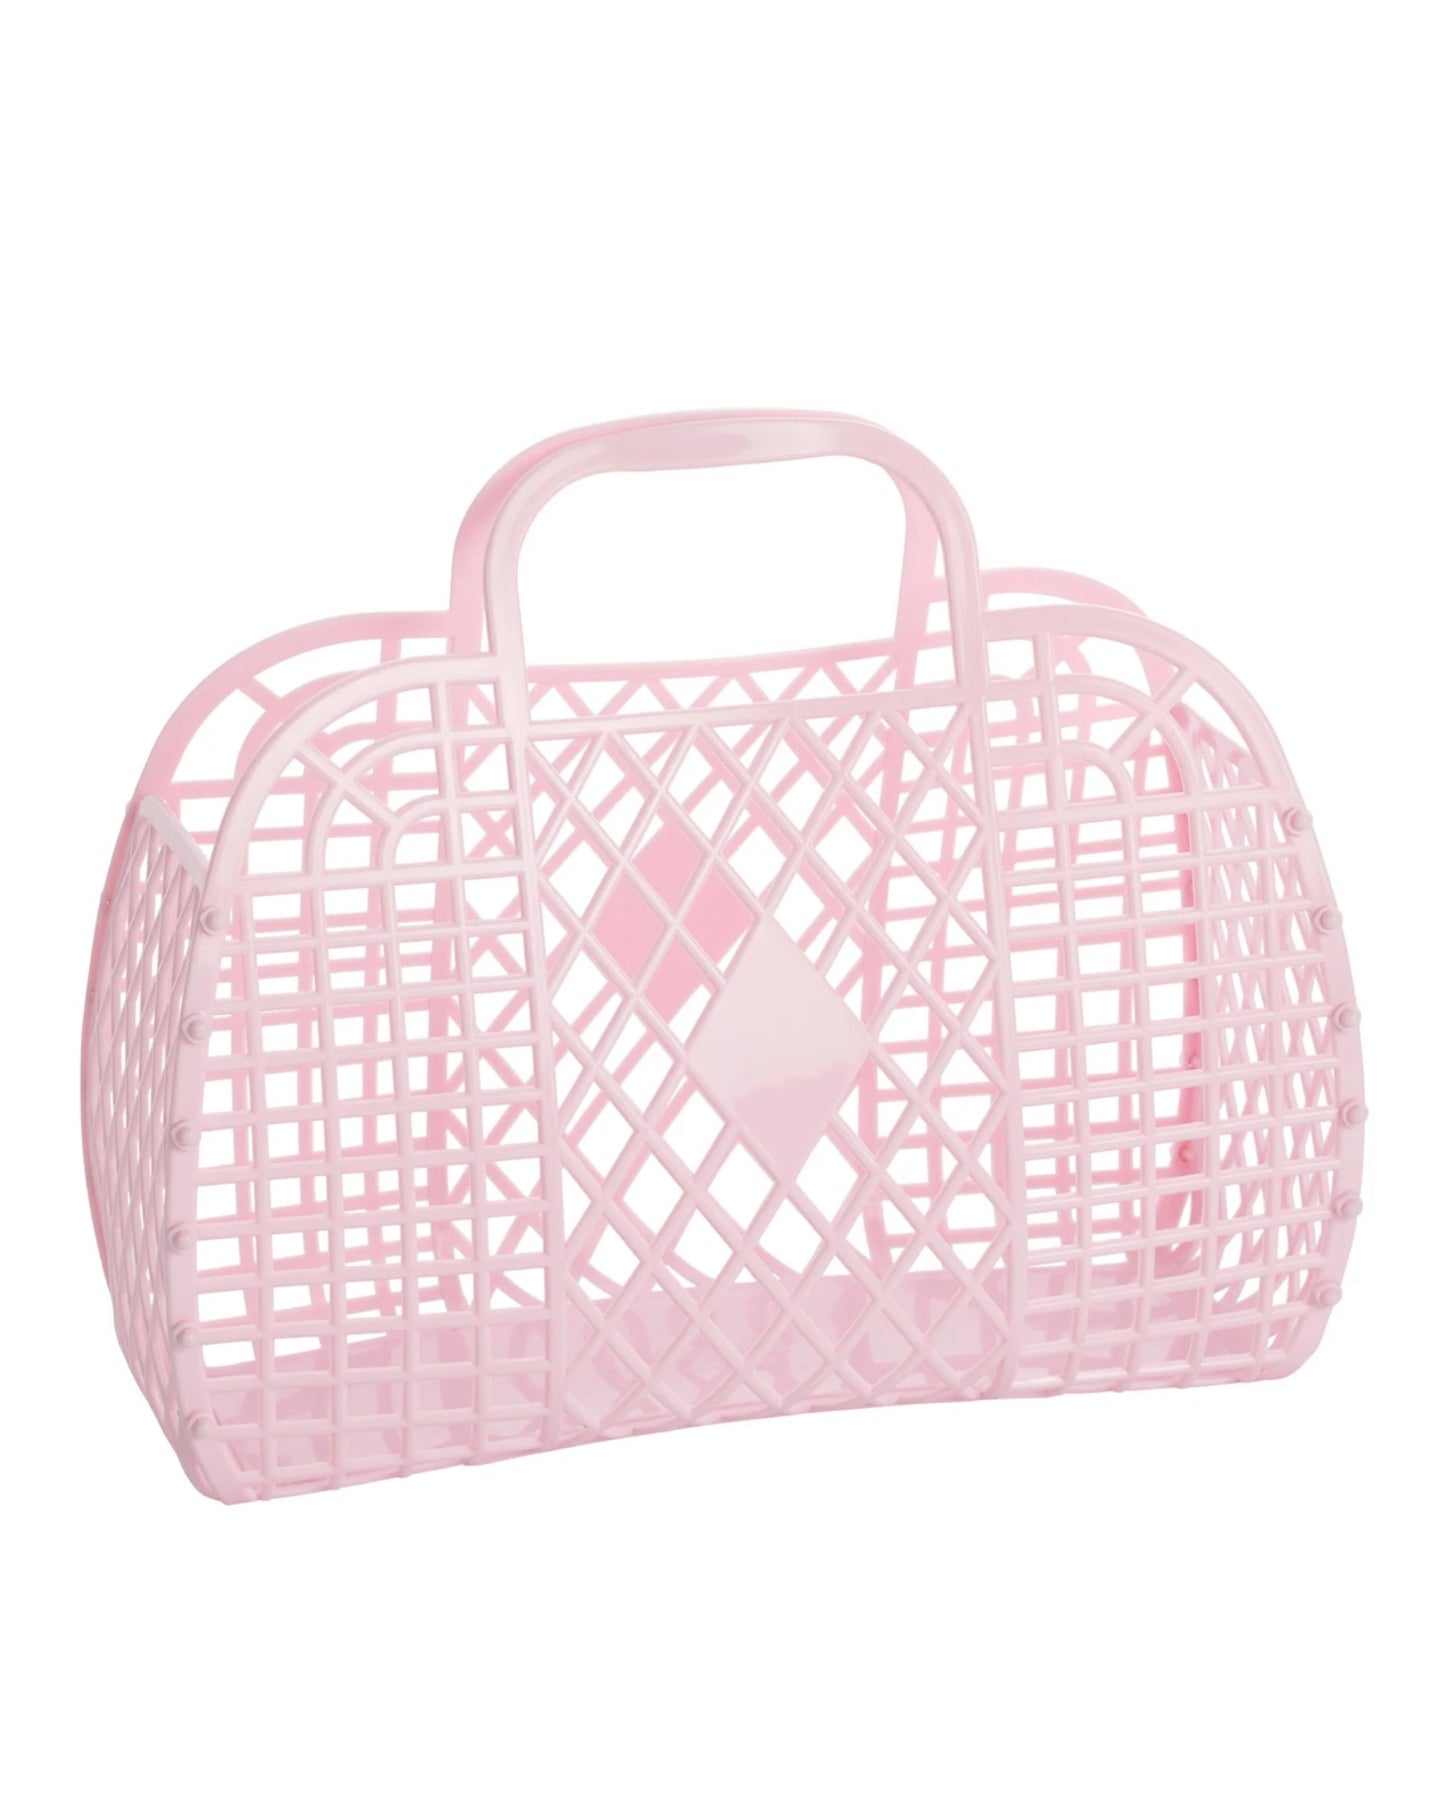 Load image into Gallery viewer, Retro Basket Jelly Bag - Large Pink
